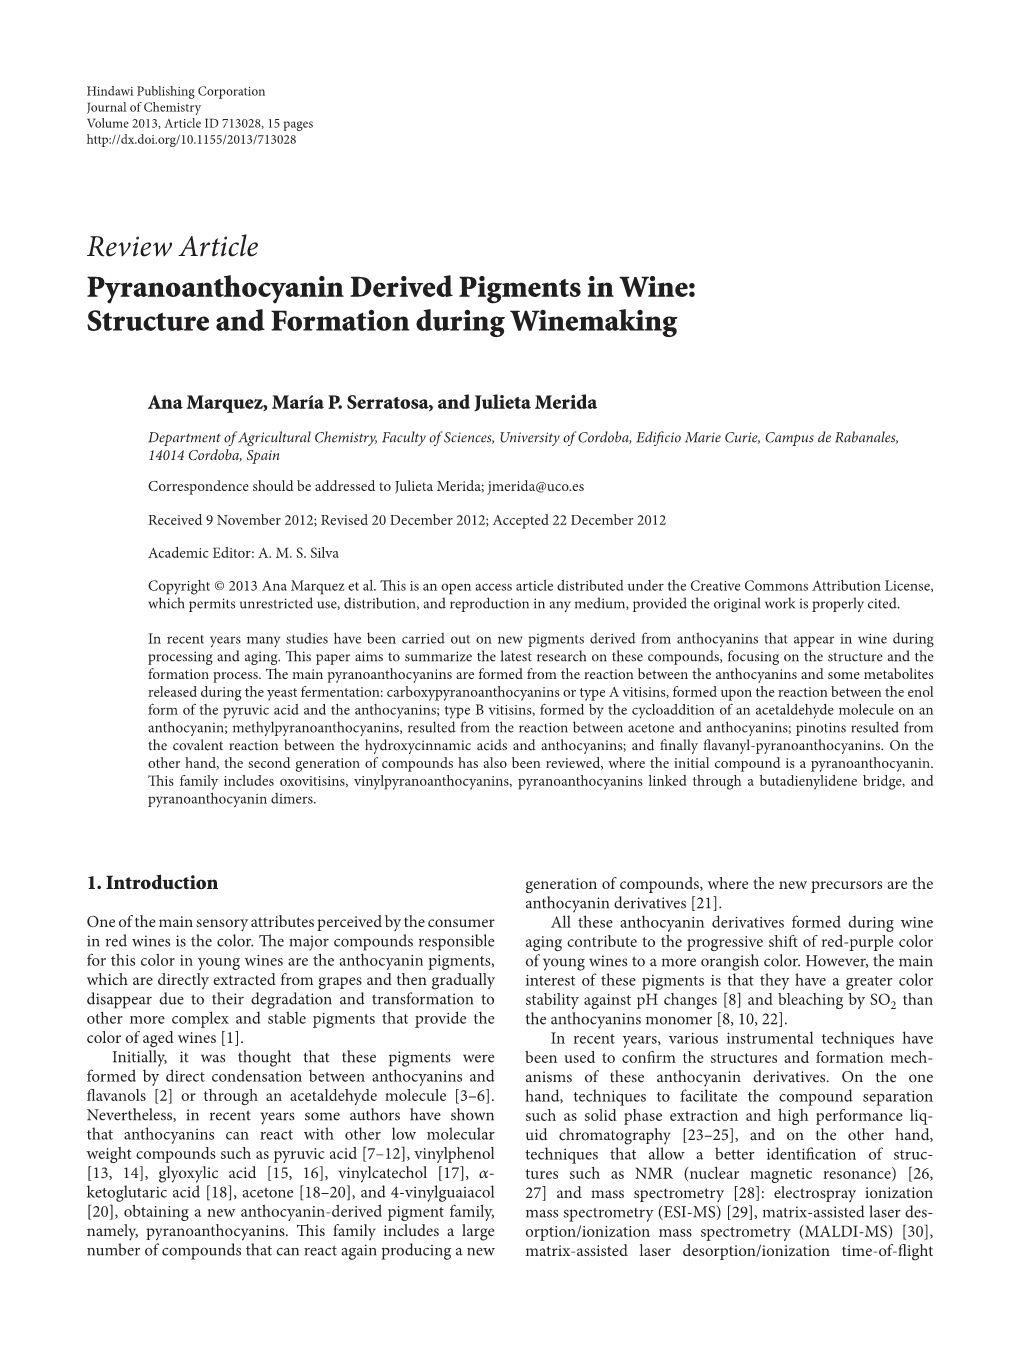 Pyranoanthocyanin Derived Pigments in Wine: Structure and Formation During Winemaking